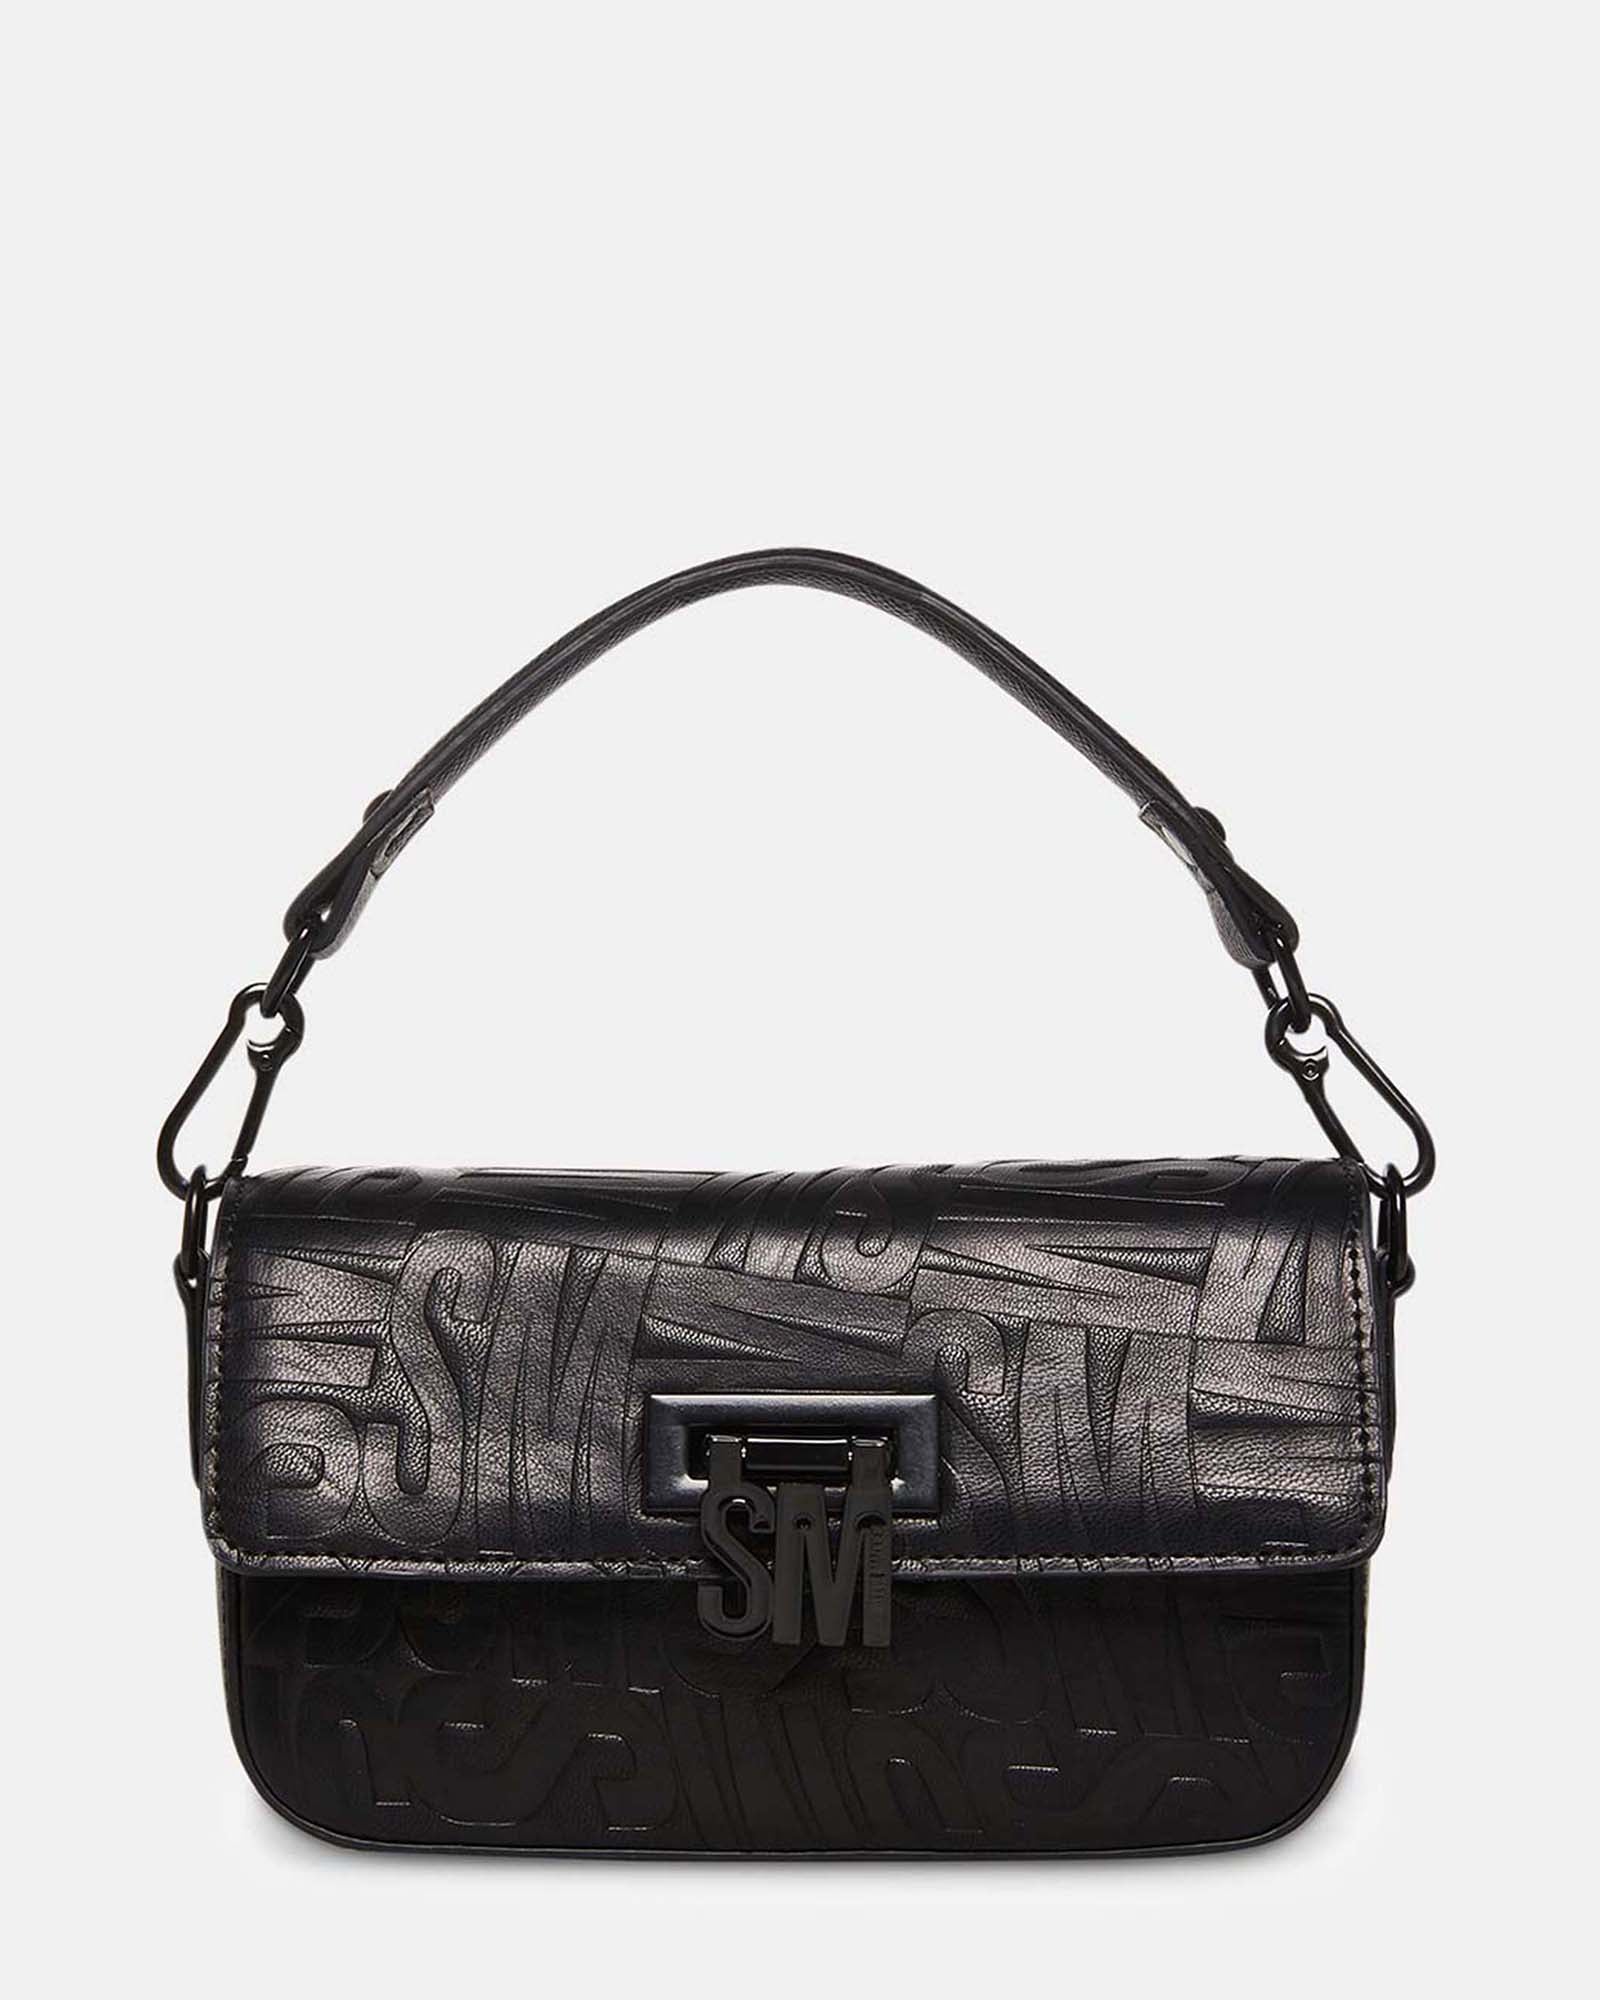 Bags  No 8833313 Noatd 8831628 Snake Skin Multi Color Black And